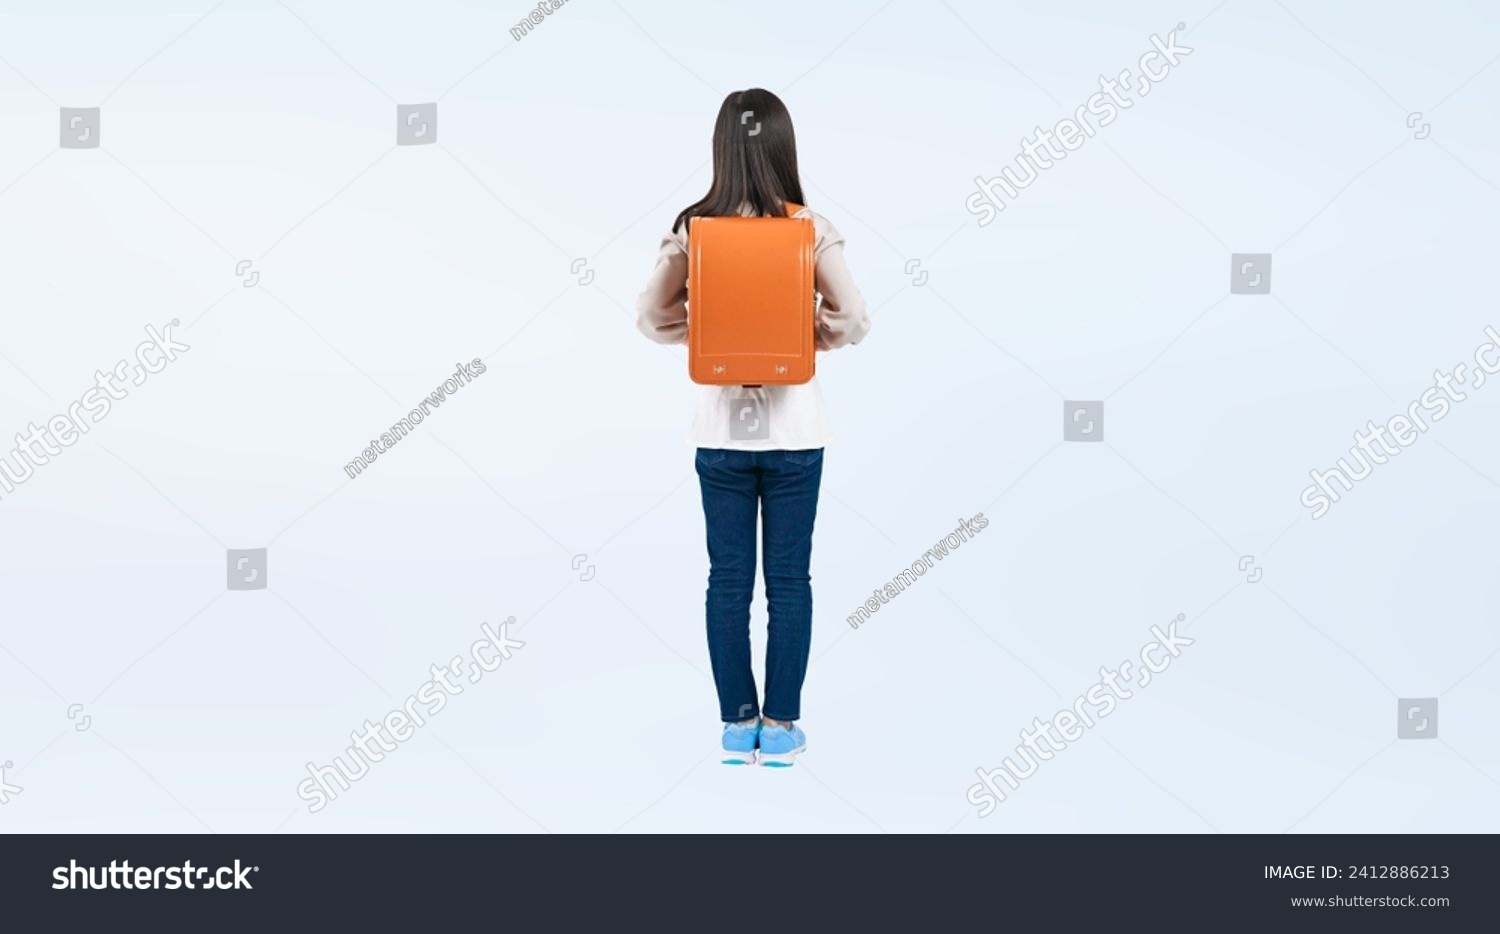 Elementary school girl standing with a school bag on her back. #2412886213